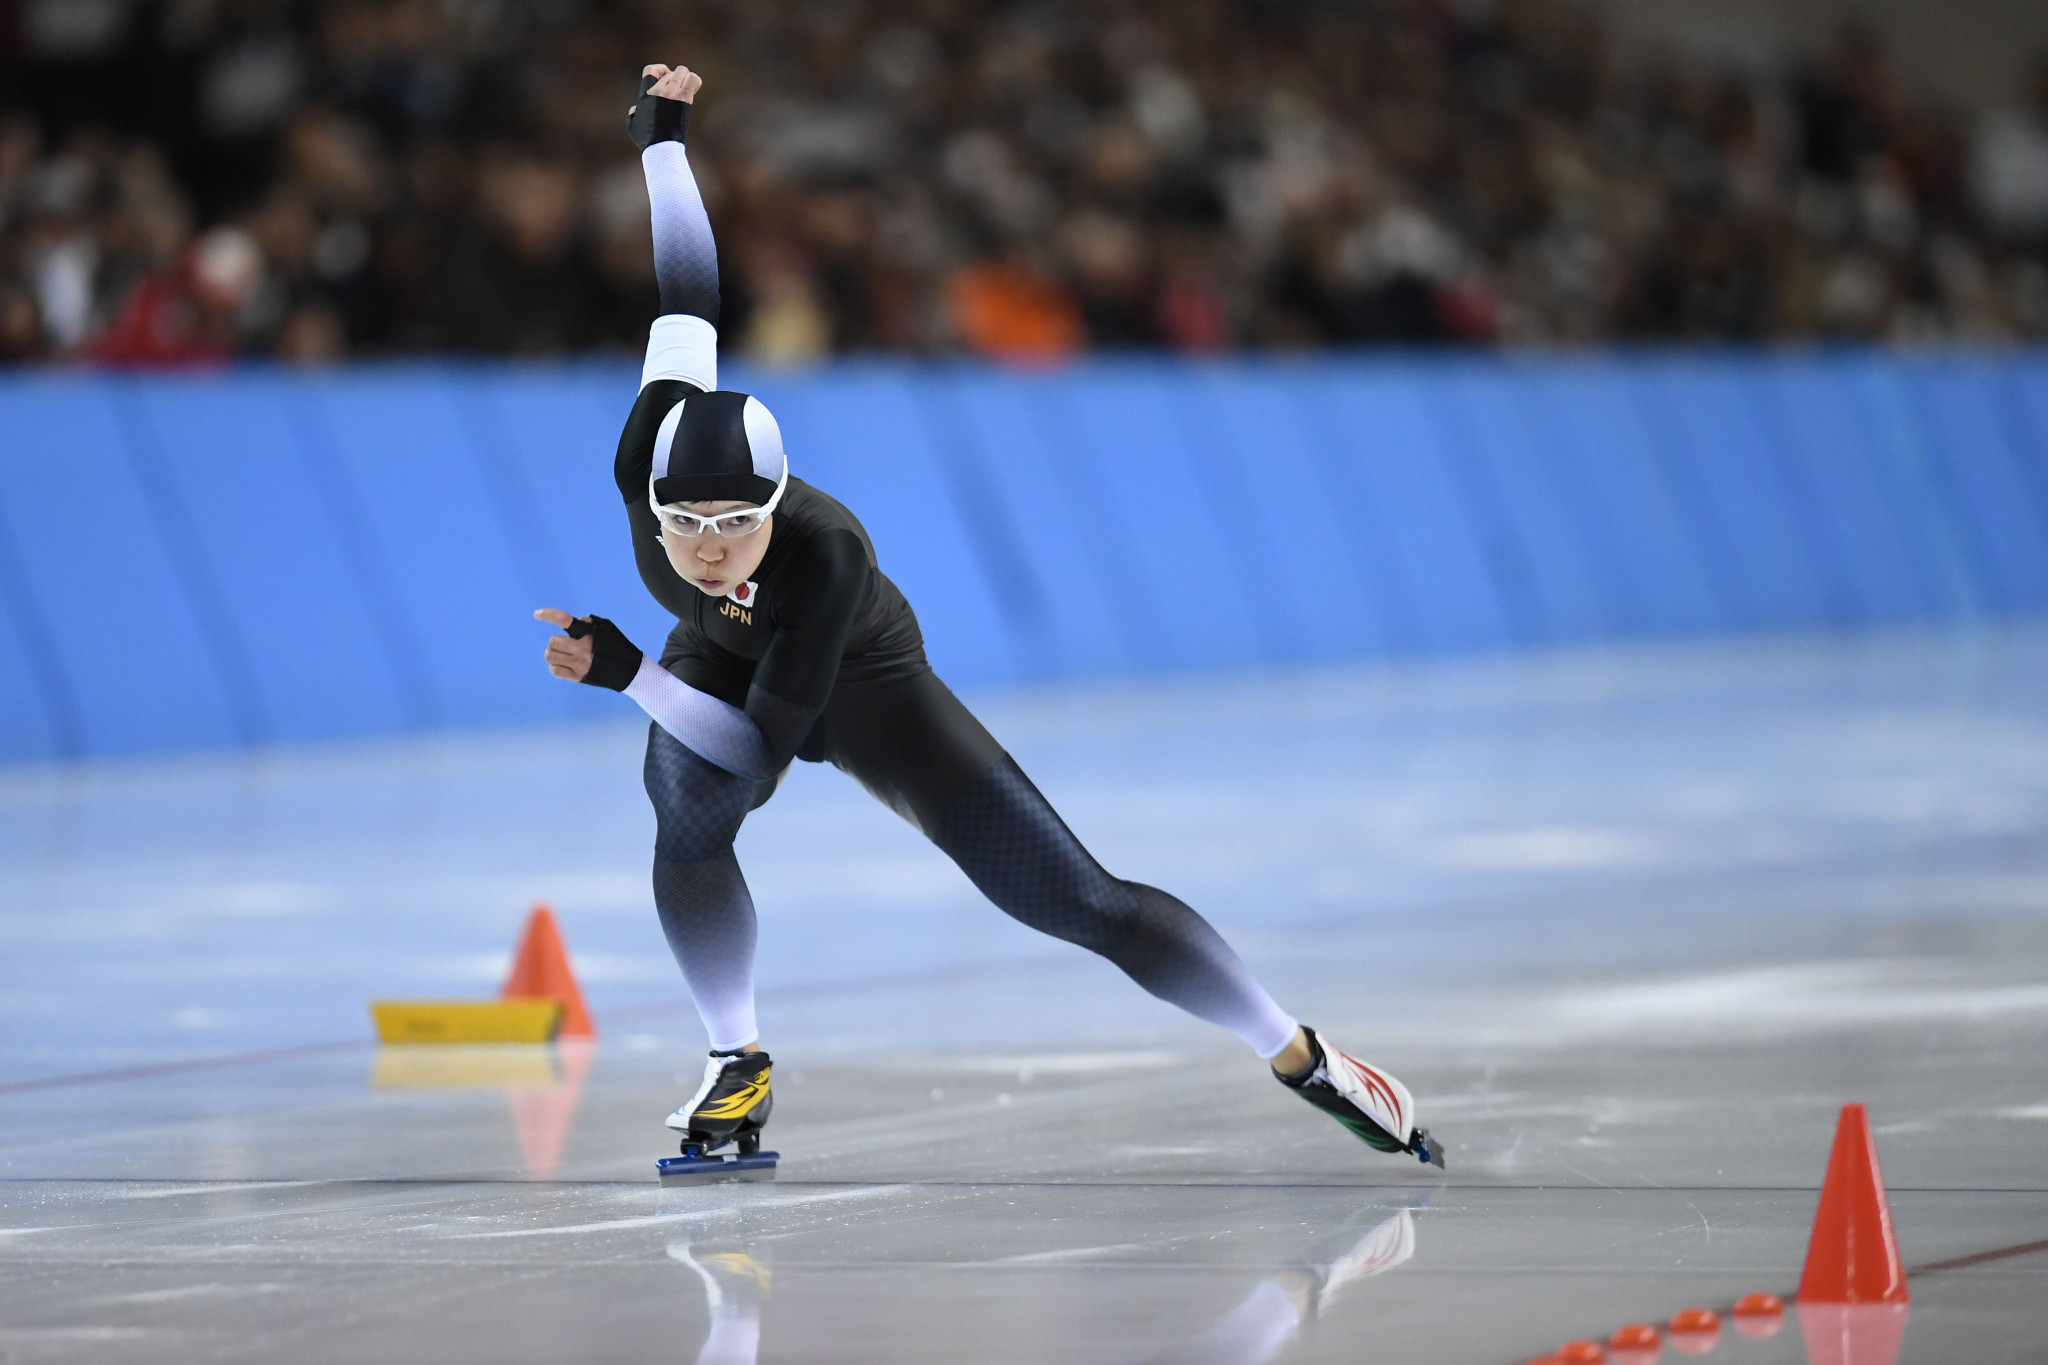 Japanese skater Nao Kodaira clocked a track record on her way to winning the first women's 500m event of the season ©Getty Images